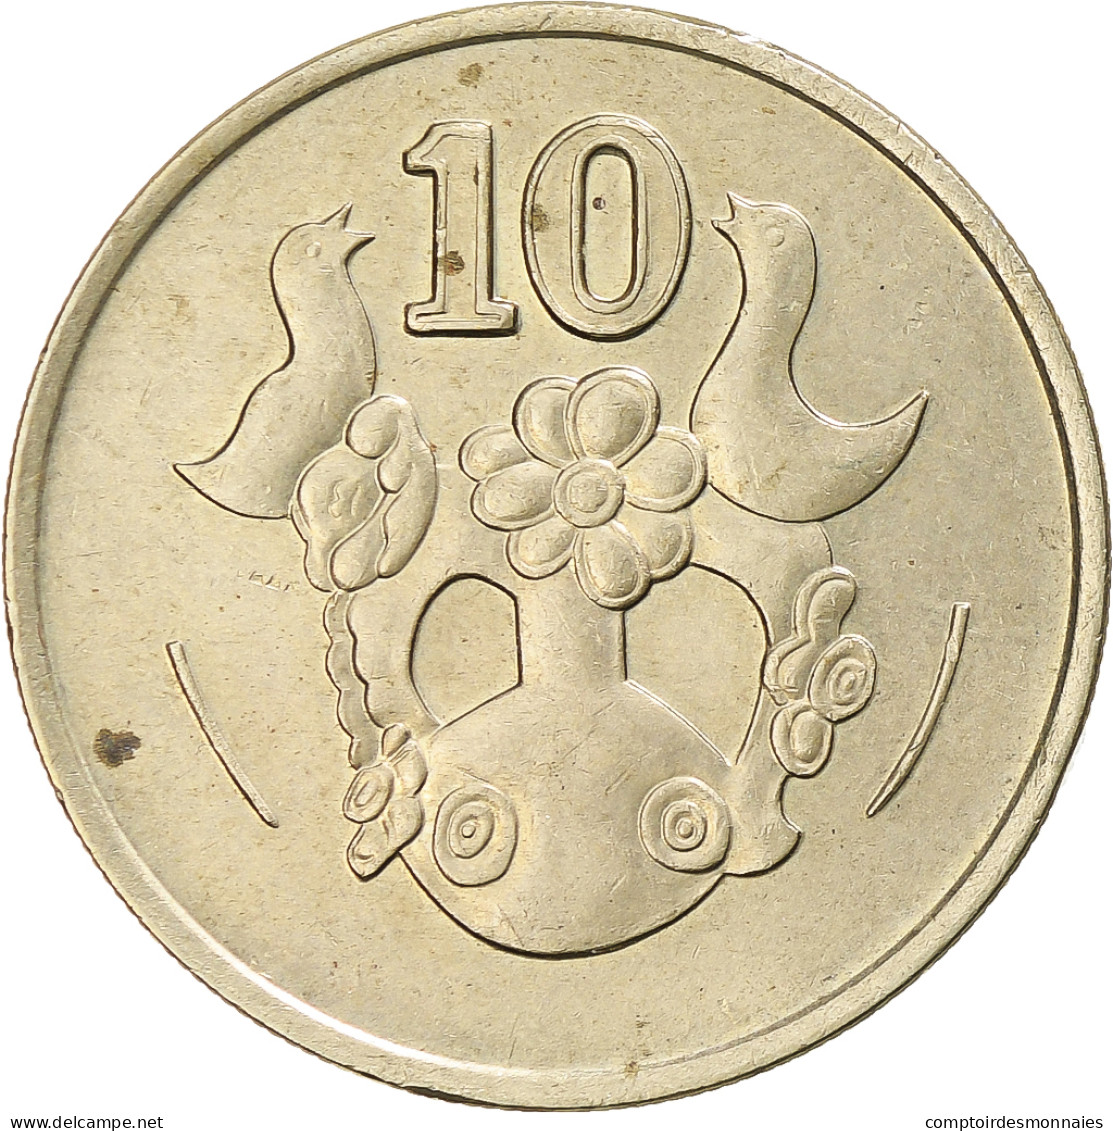 Chypre, 10 Cents, 1991 - Cyprus